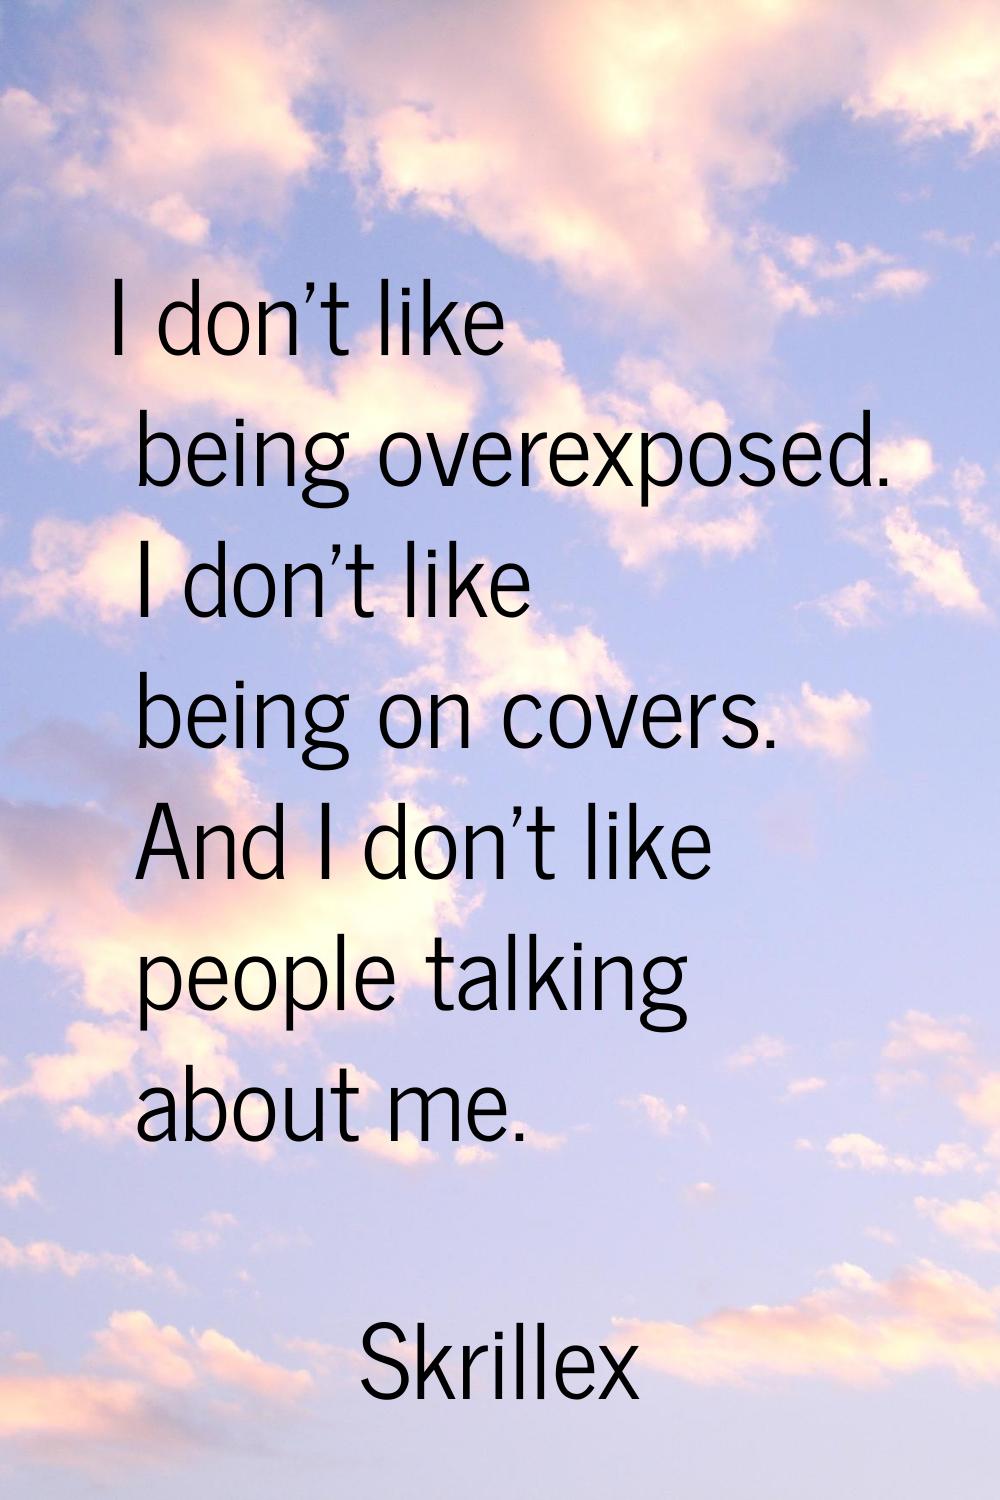 I don't like being overexposed. I don't like being on covers. And I don't like people talking about